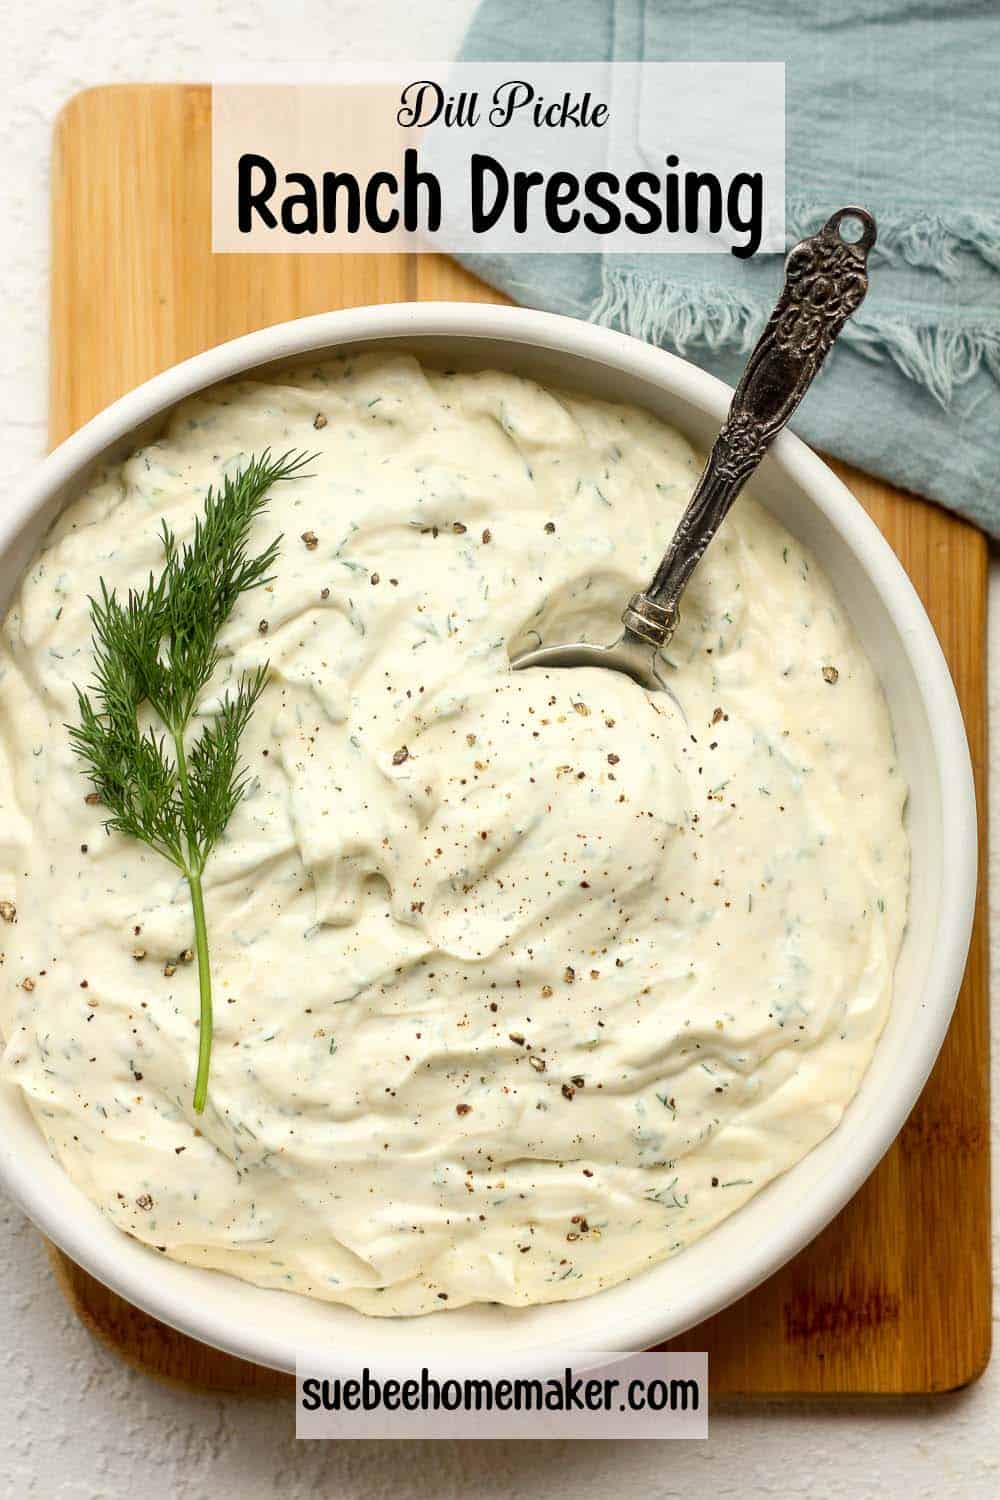 A bowl of dill pickle ranch dressing with a tablespoon inside.